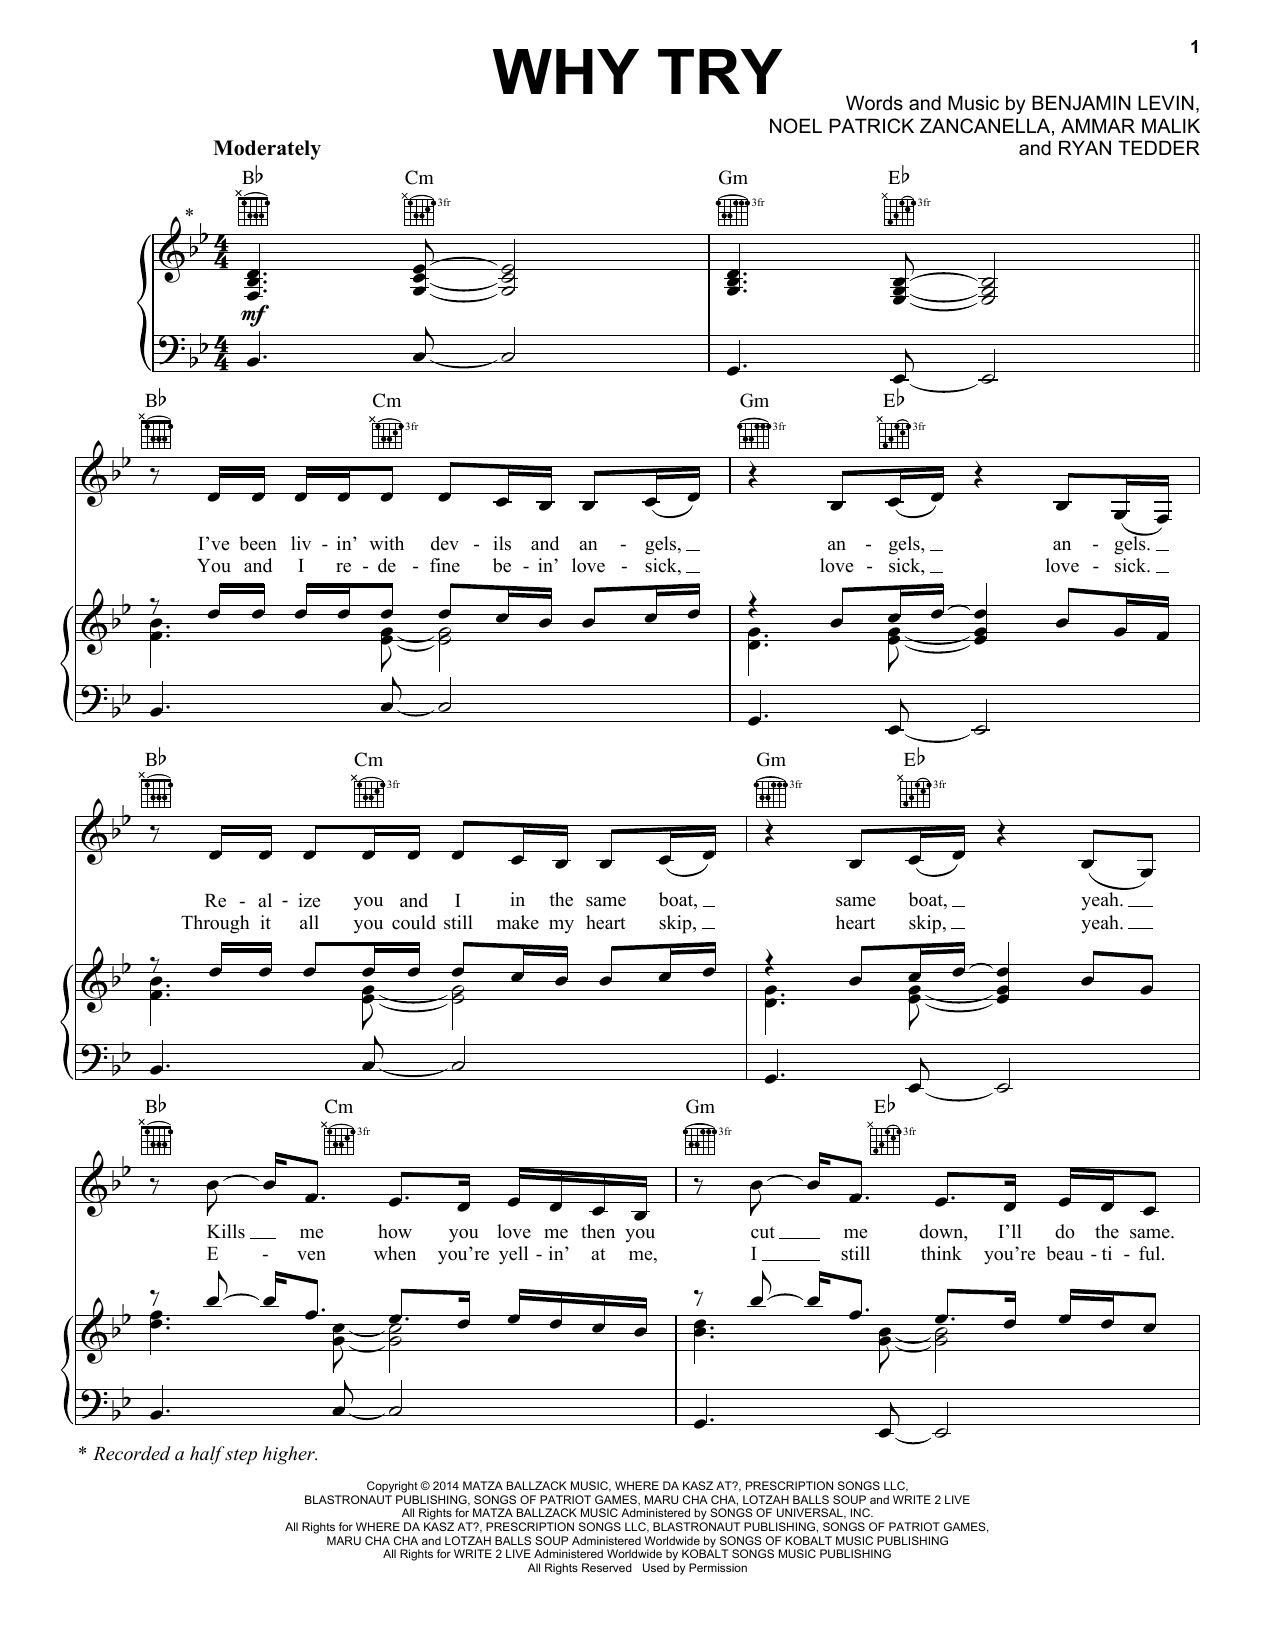 Download Ariana Grande Why Try Sheet Music